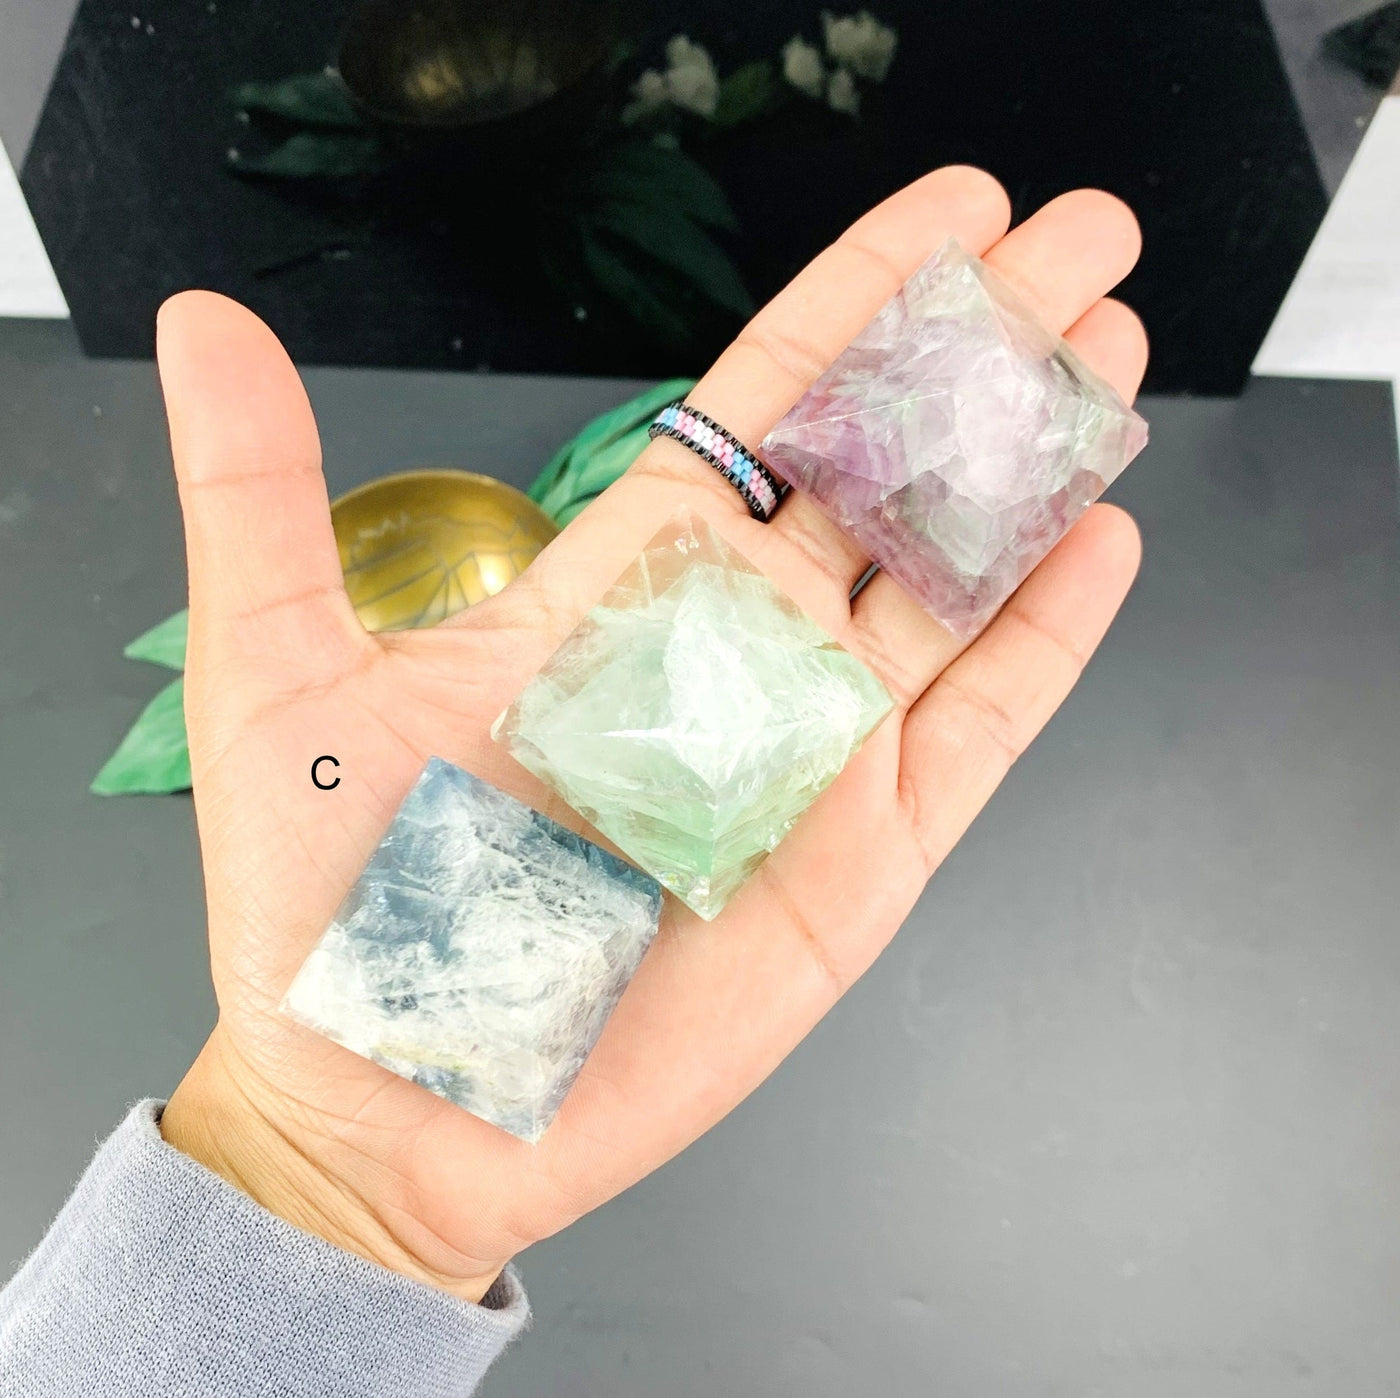 Set C of the Small Fluorite Pyramid on hand